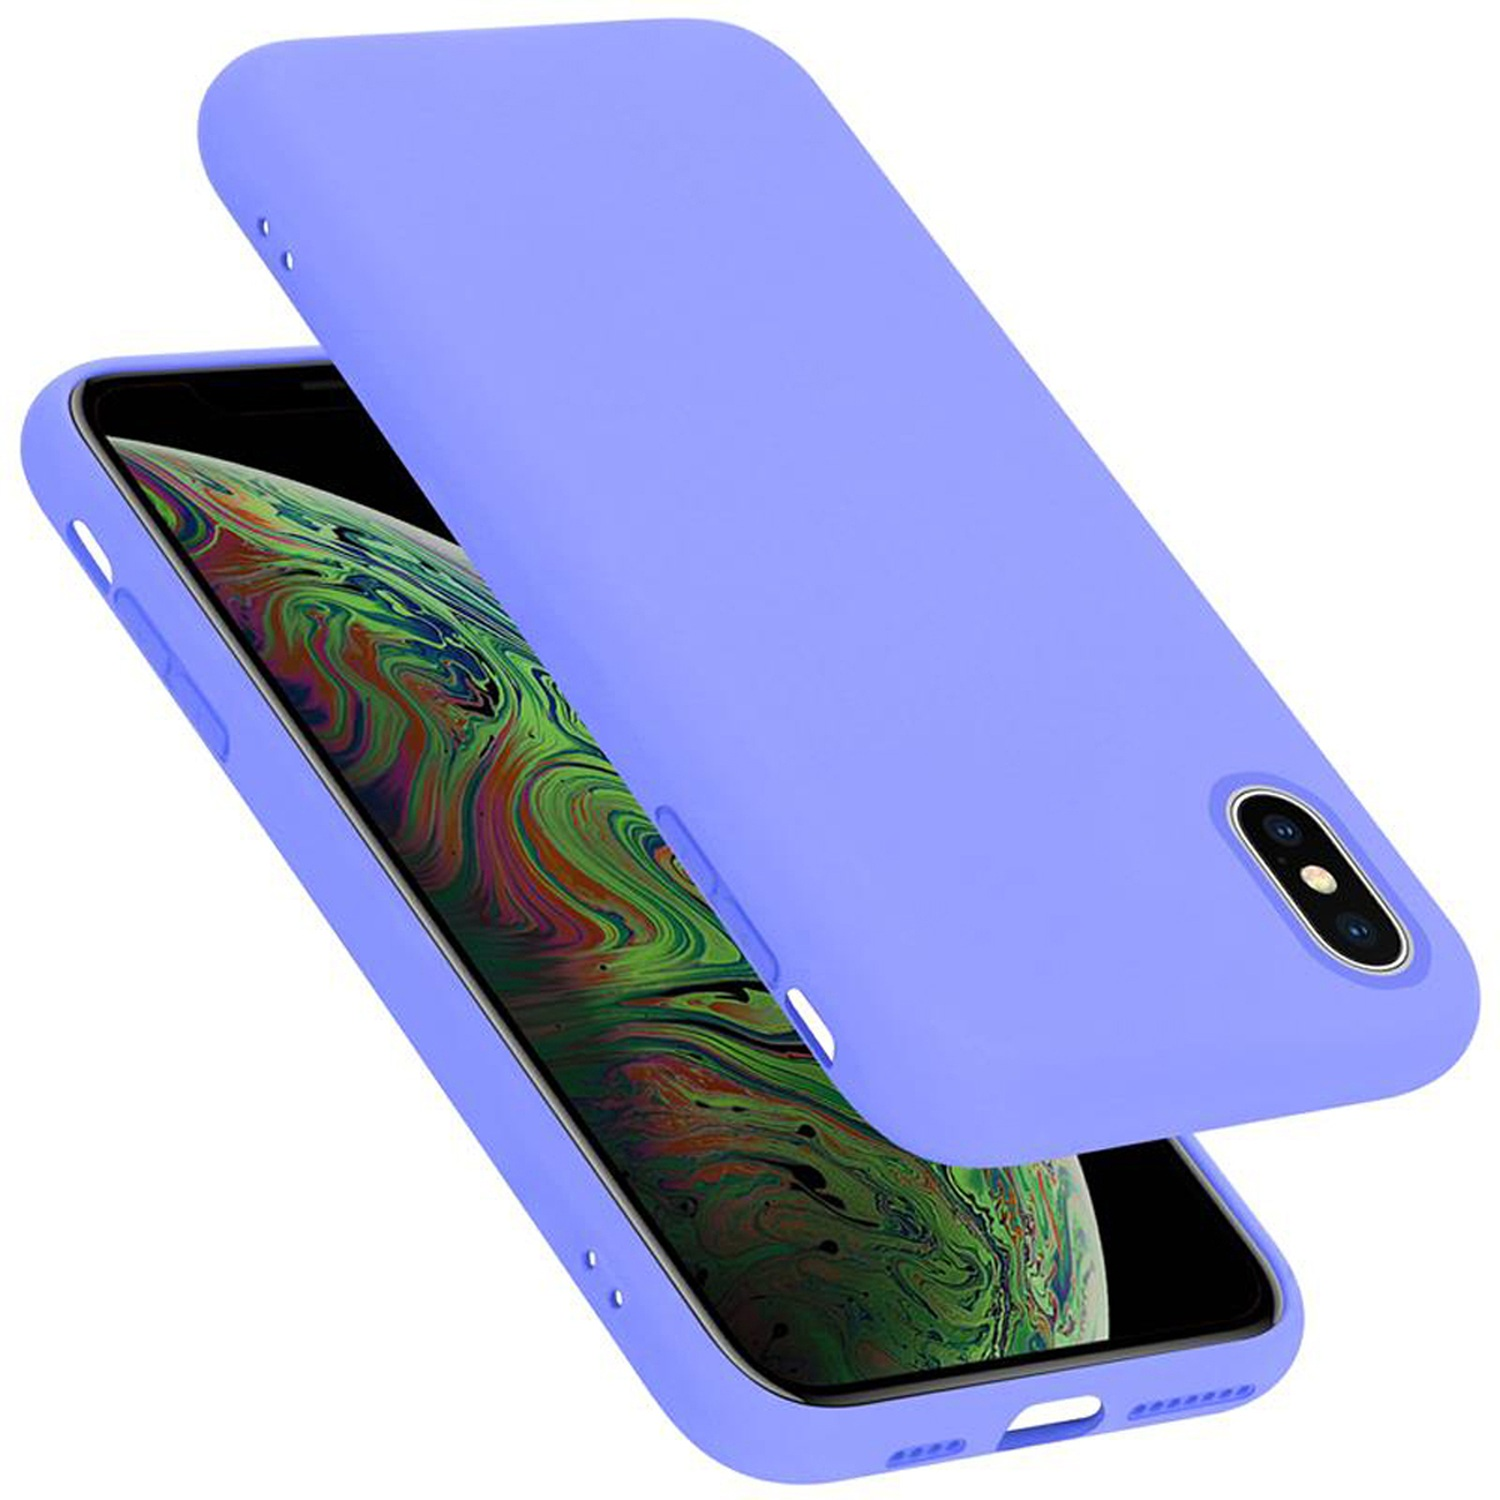 Backcover, Style, Silicone XS MAX, Apple, iPhone CADORABO Case LILA Hülle Liquid LIQUID HELL im